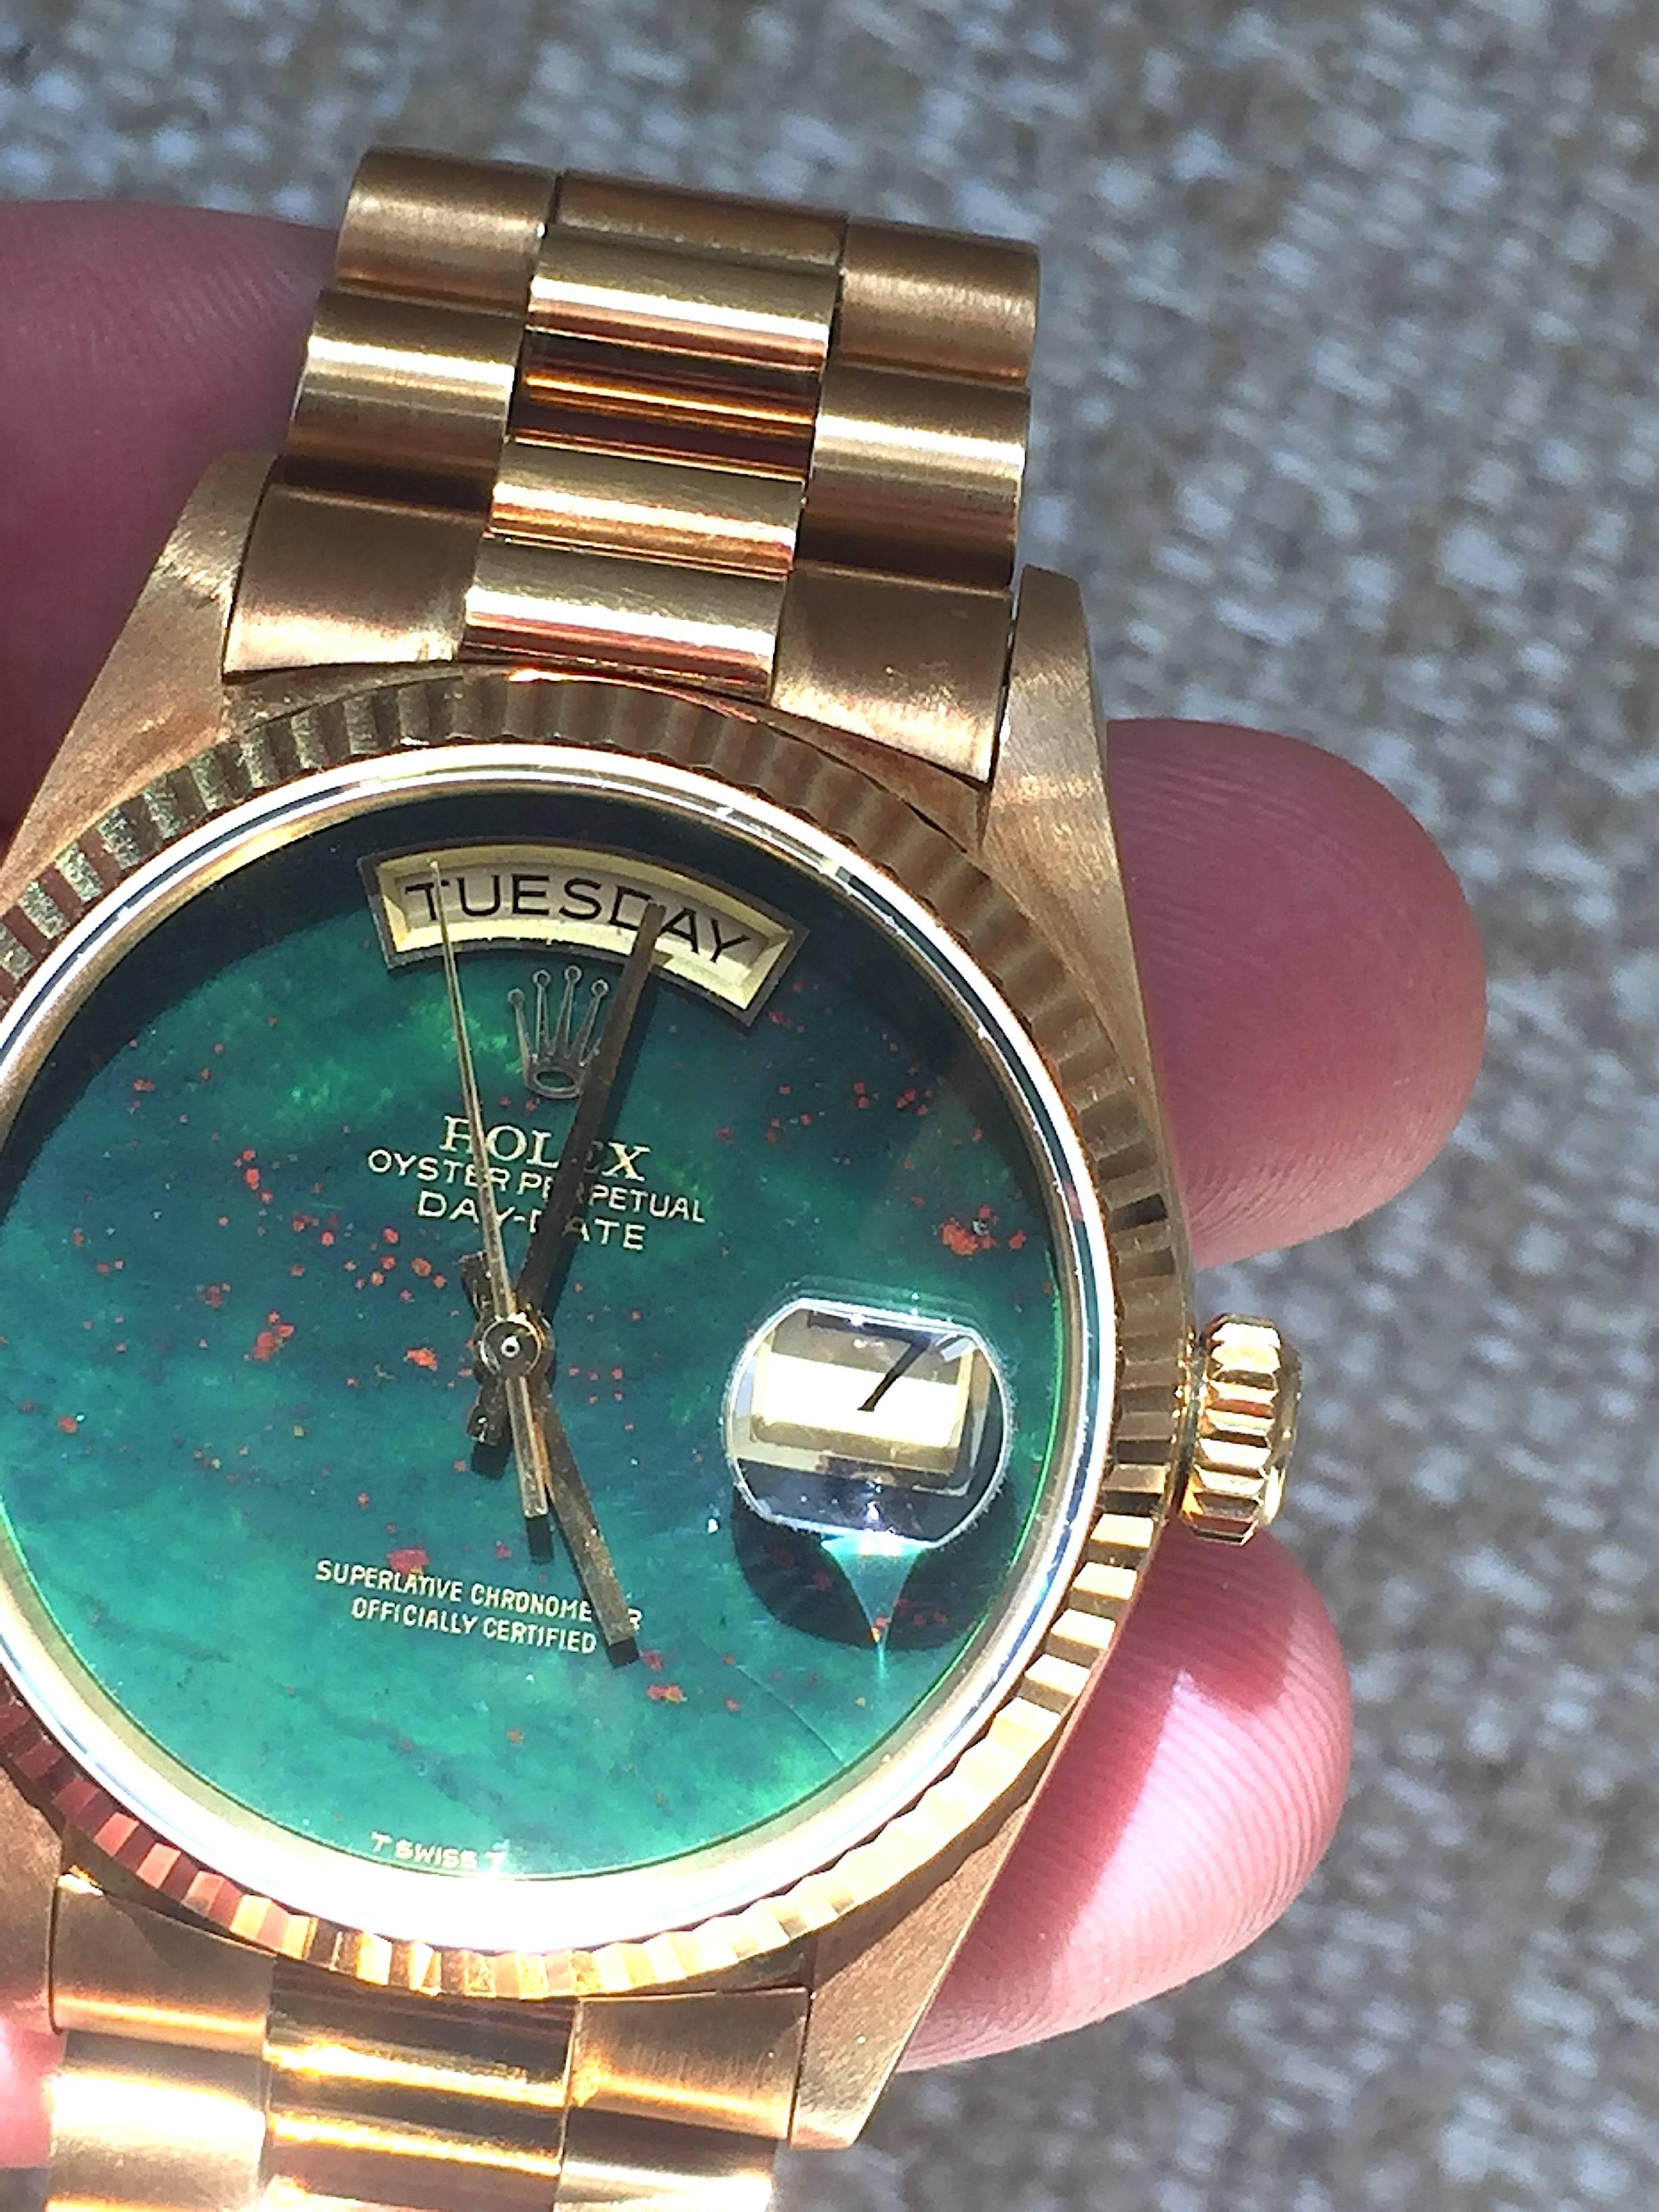 Rolex 18K Yellow Gold Day-Date Presidential Watch
Rare Factory Rolex Bloodstone Heliotrope Dial without Hour Markers
Bloodstone Is One Of The Rarest Rolex Stone Dials Produced
The Dial  Has a Small Crack Seen with A Loupe and Under Magnification at